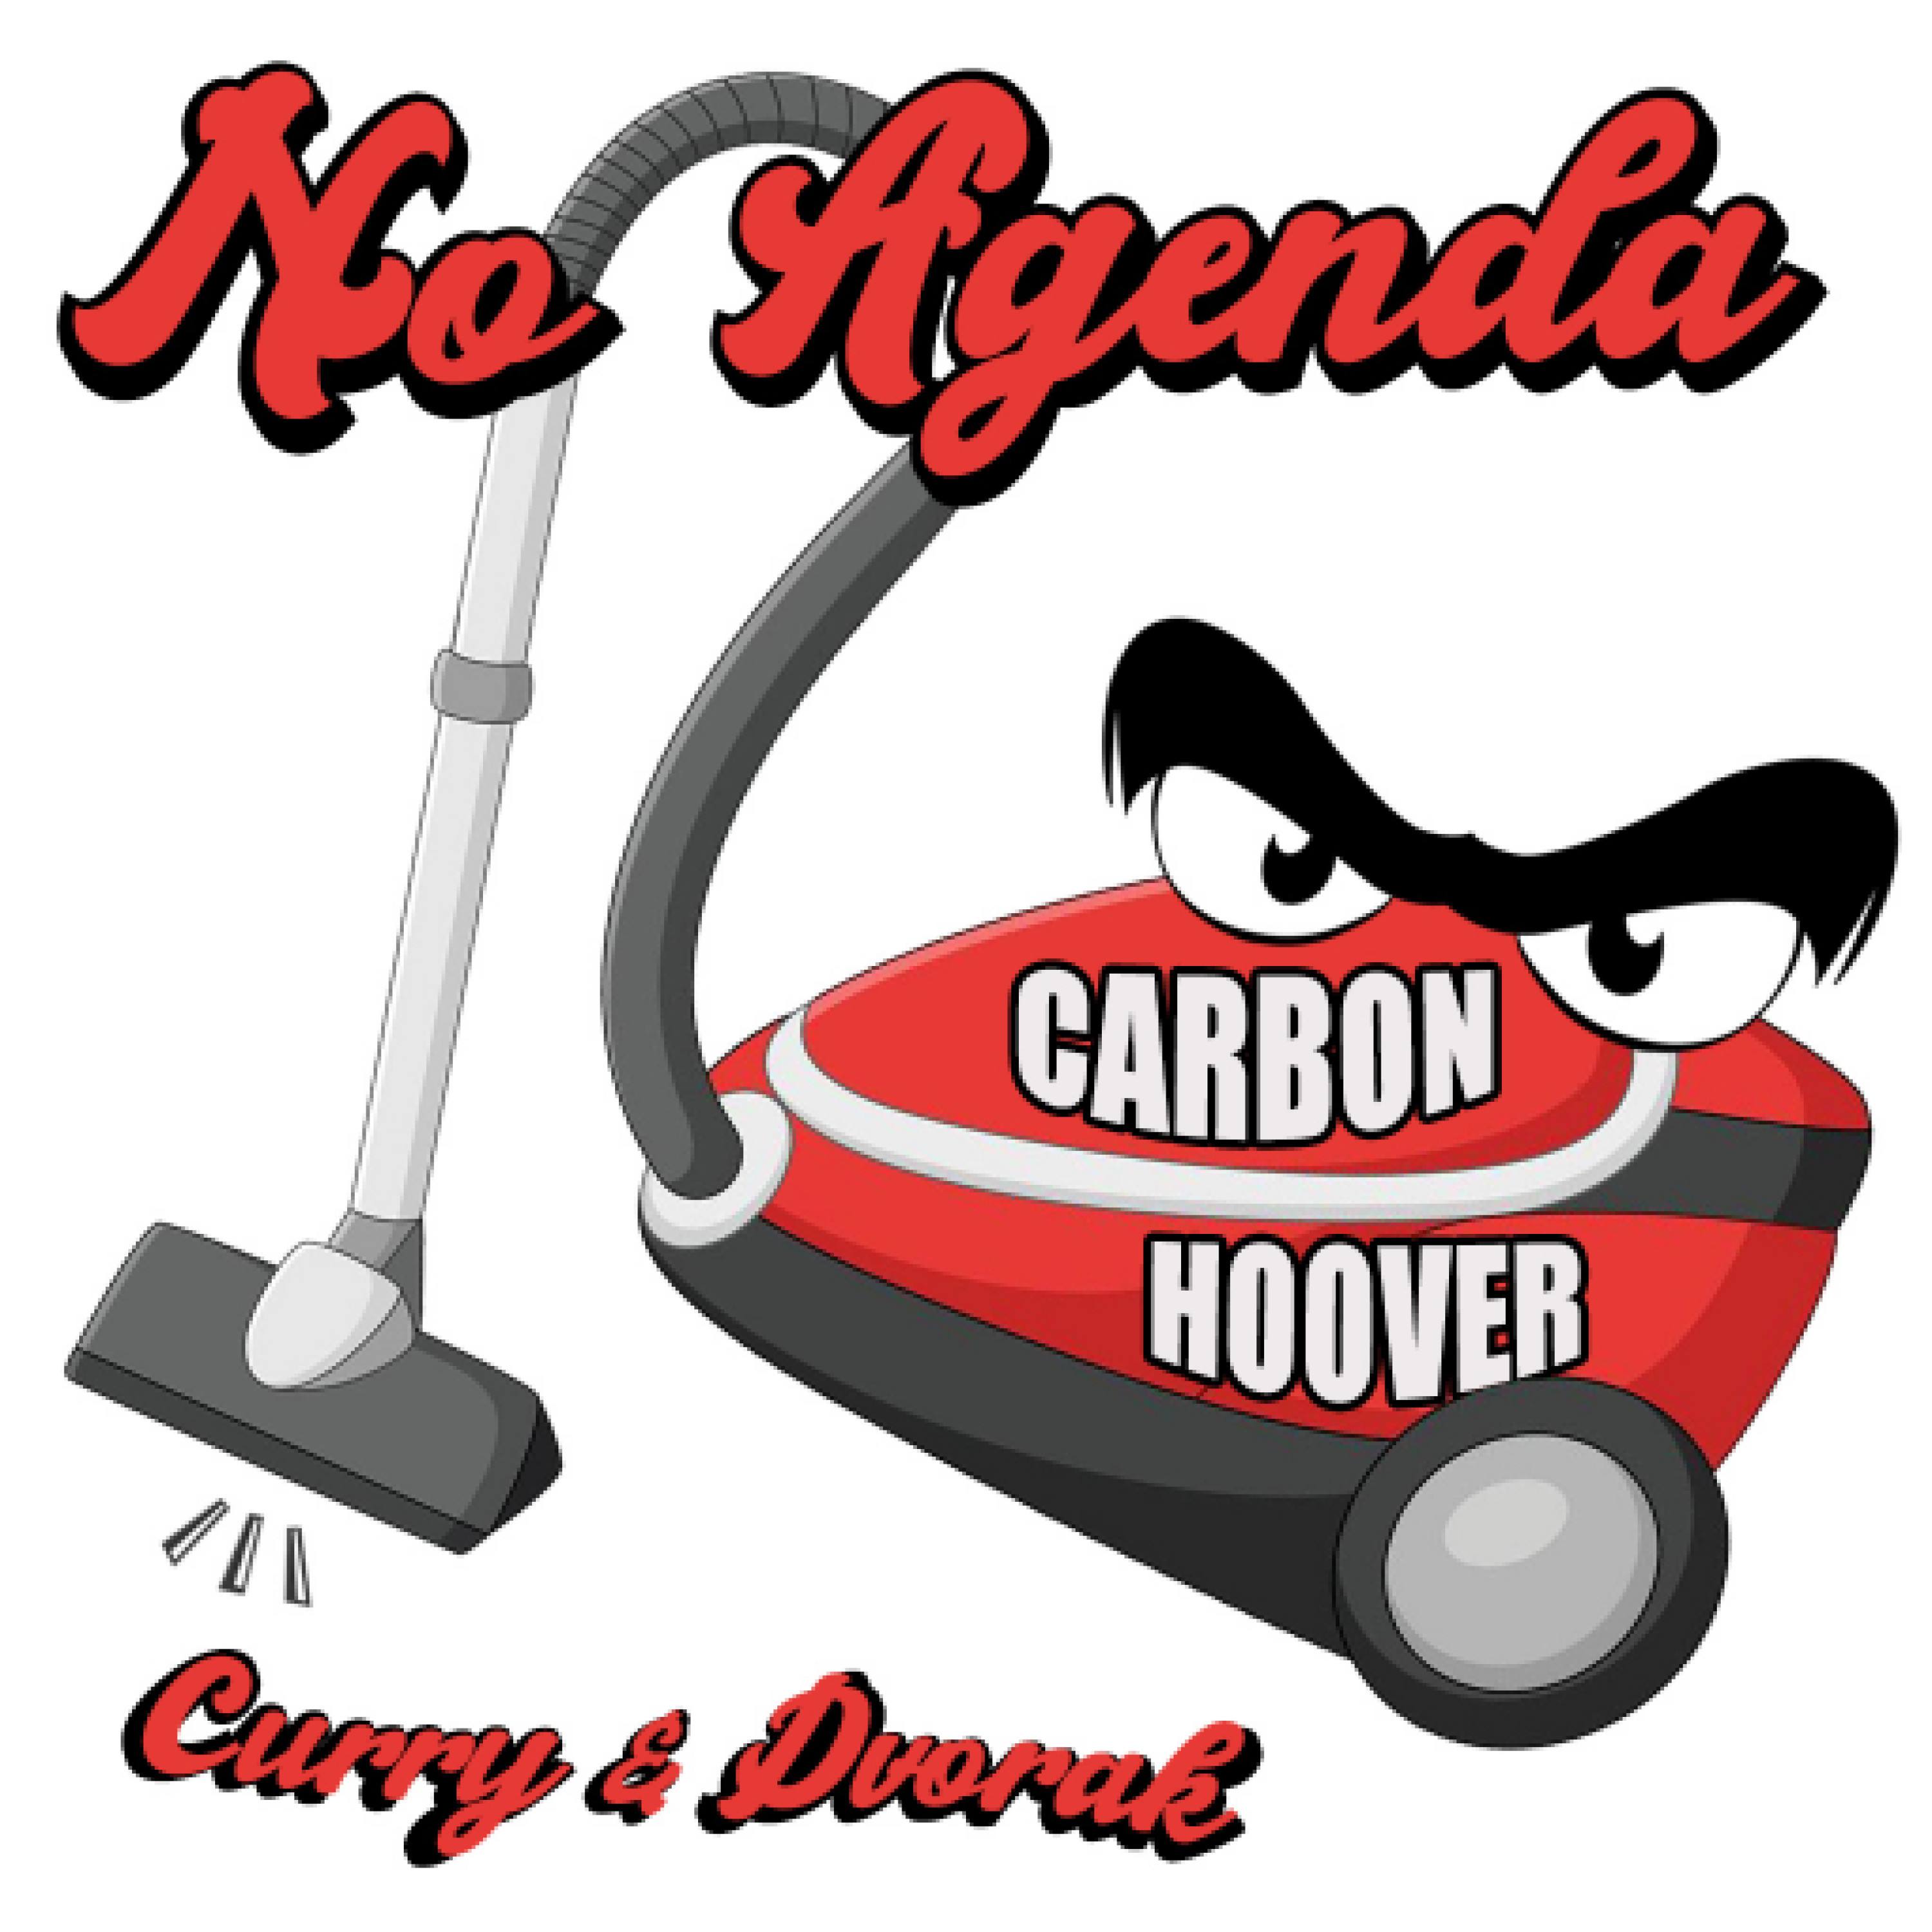 Carbon Hoover by nessworks for 